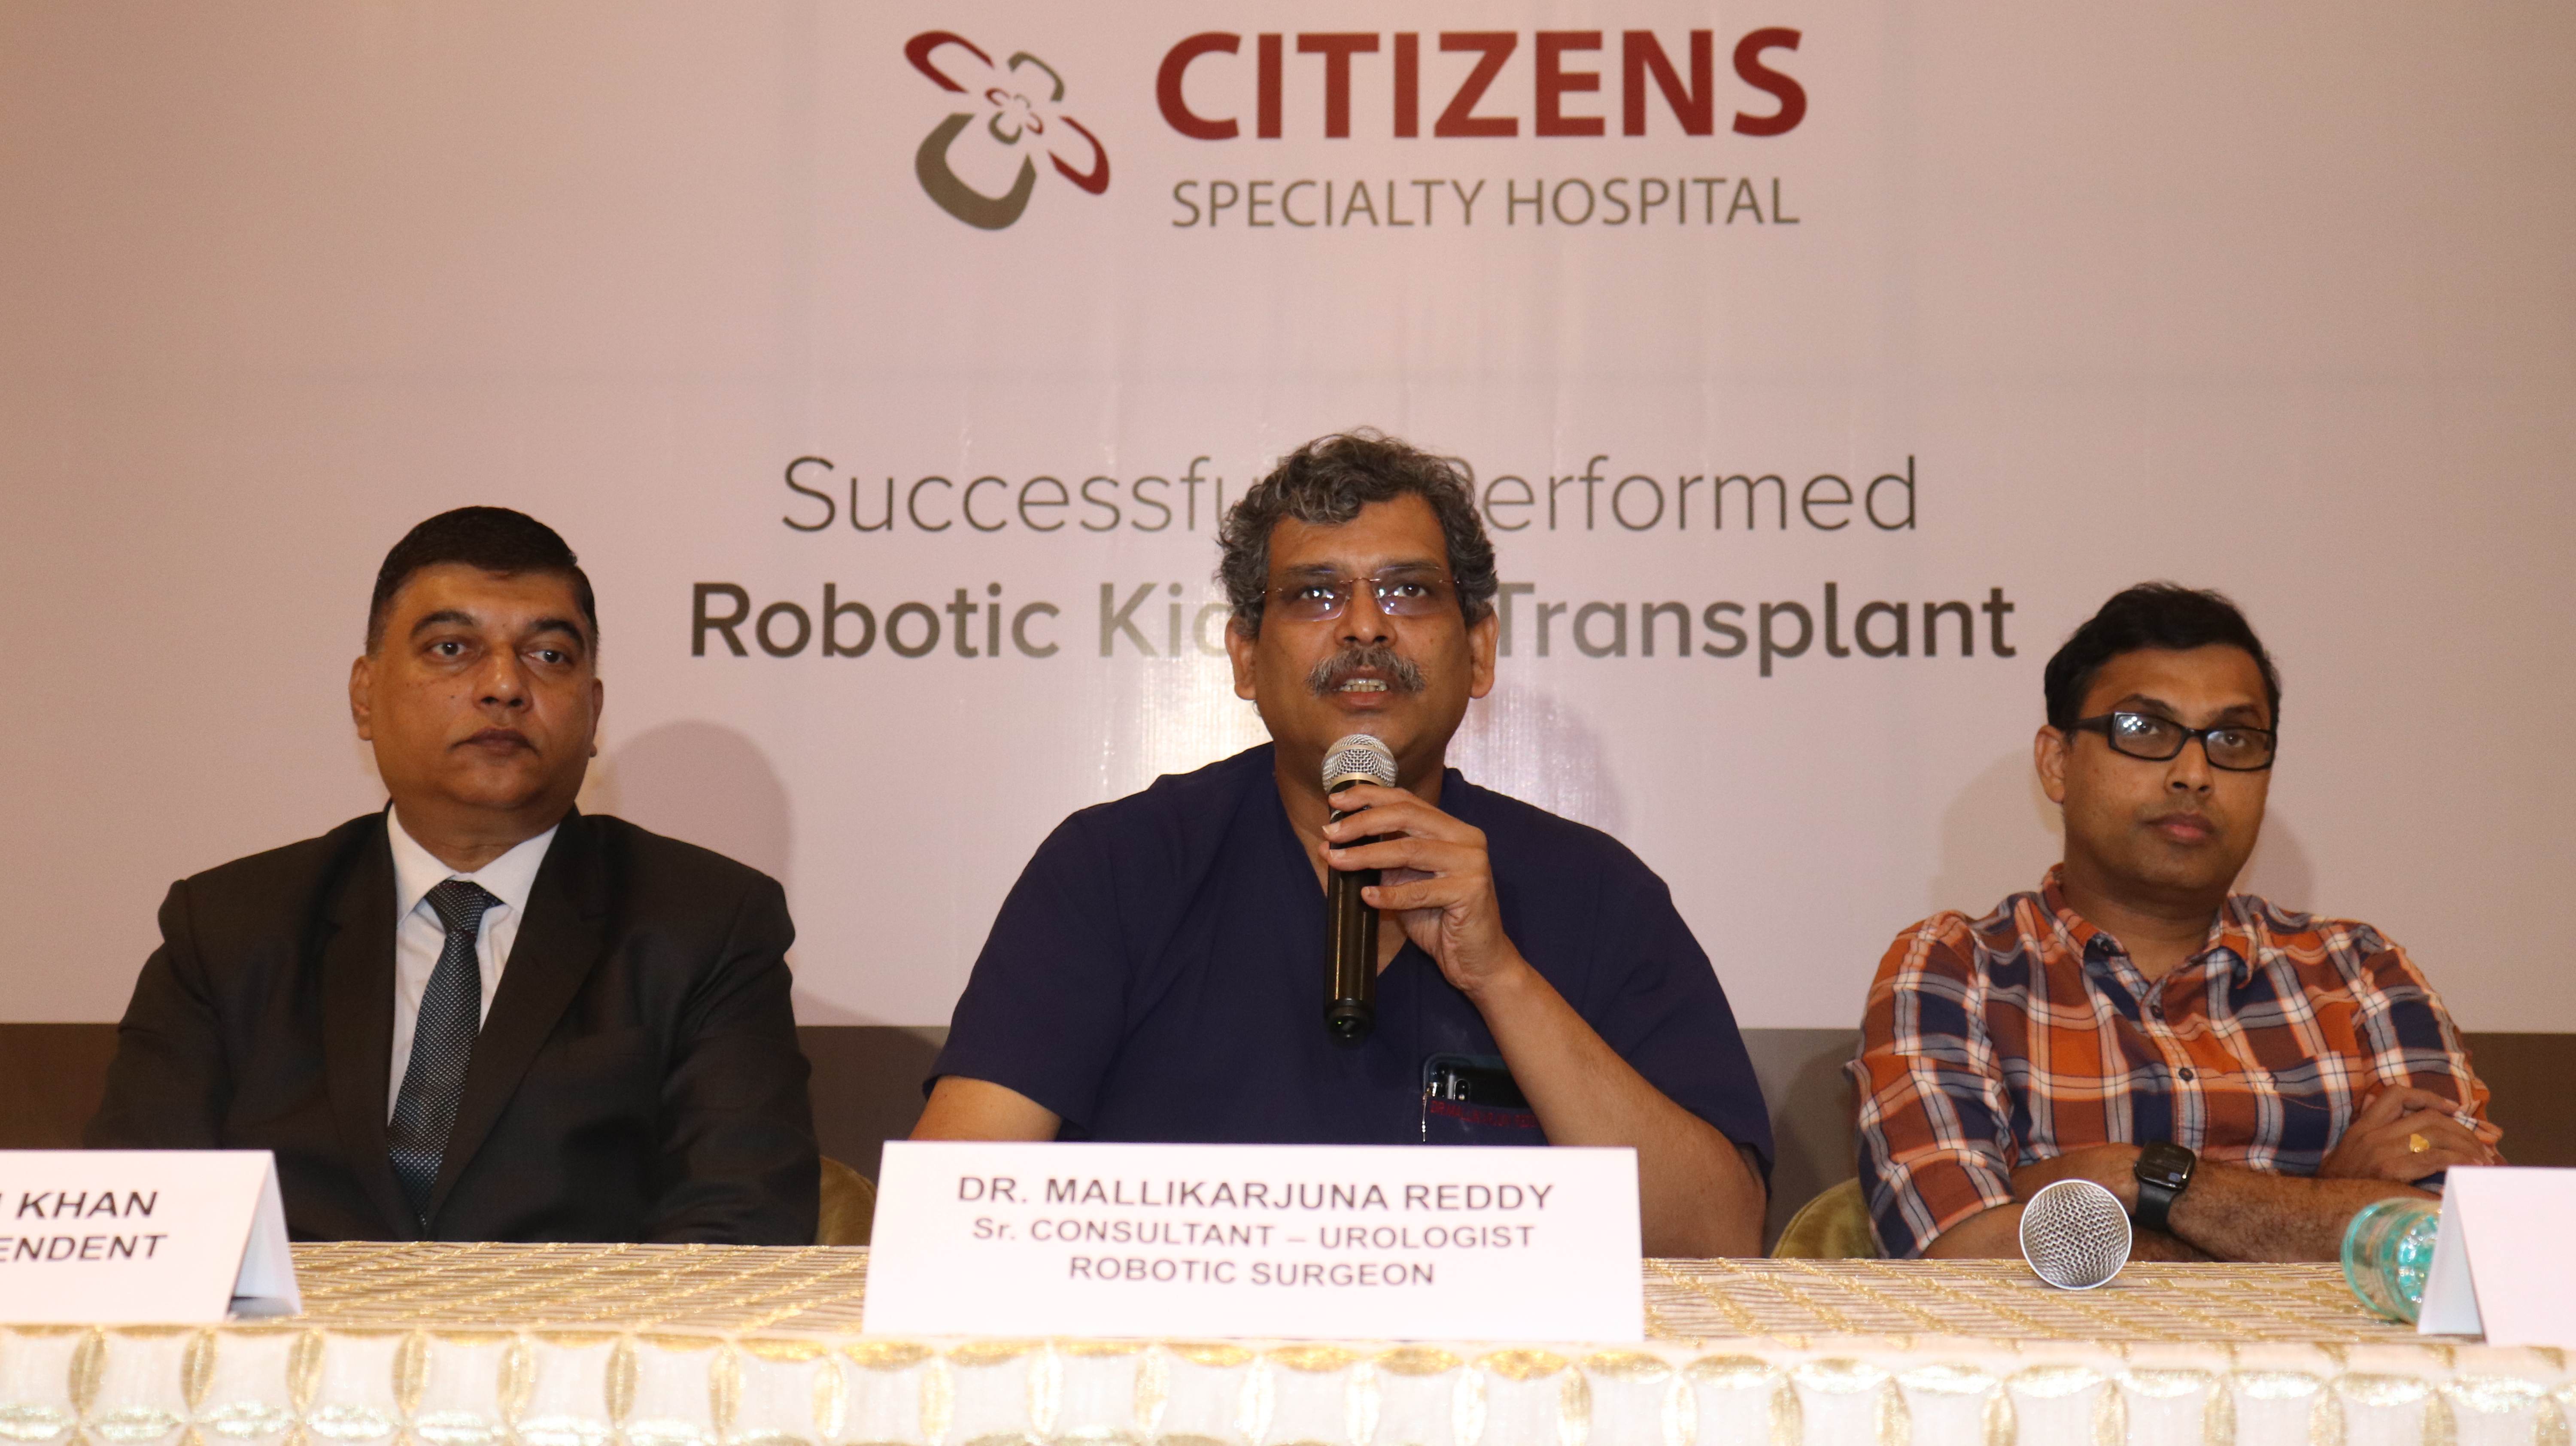 citizens-specialty-hospital-successfully-performed-robot-assisted-renal-transplant-surgery